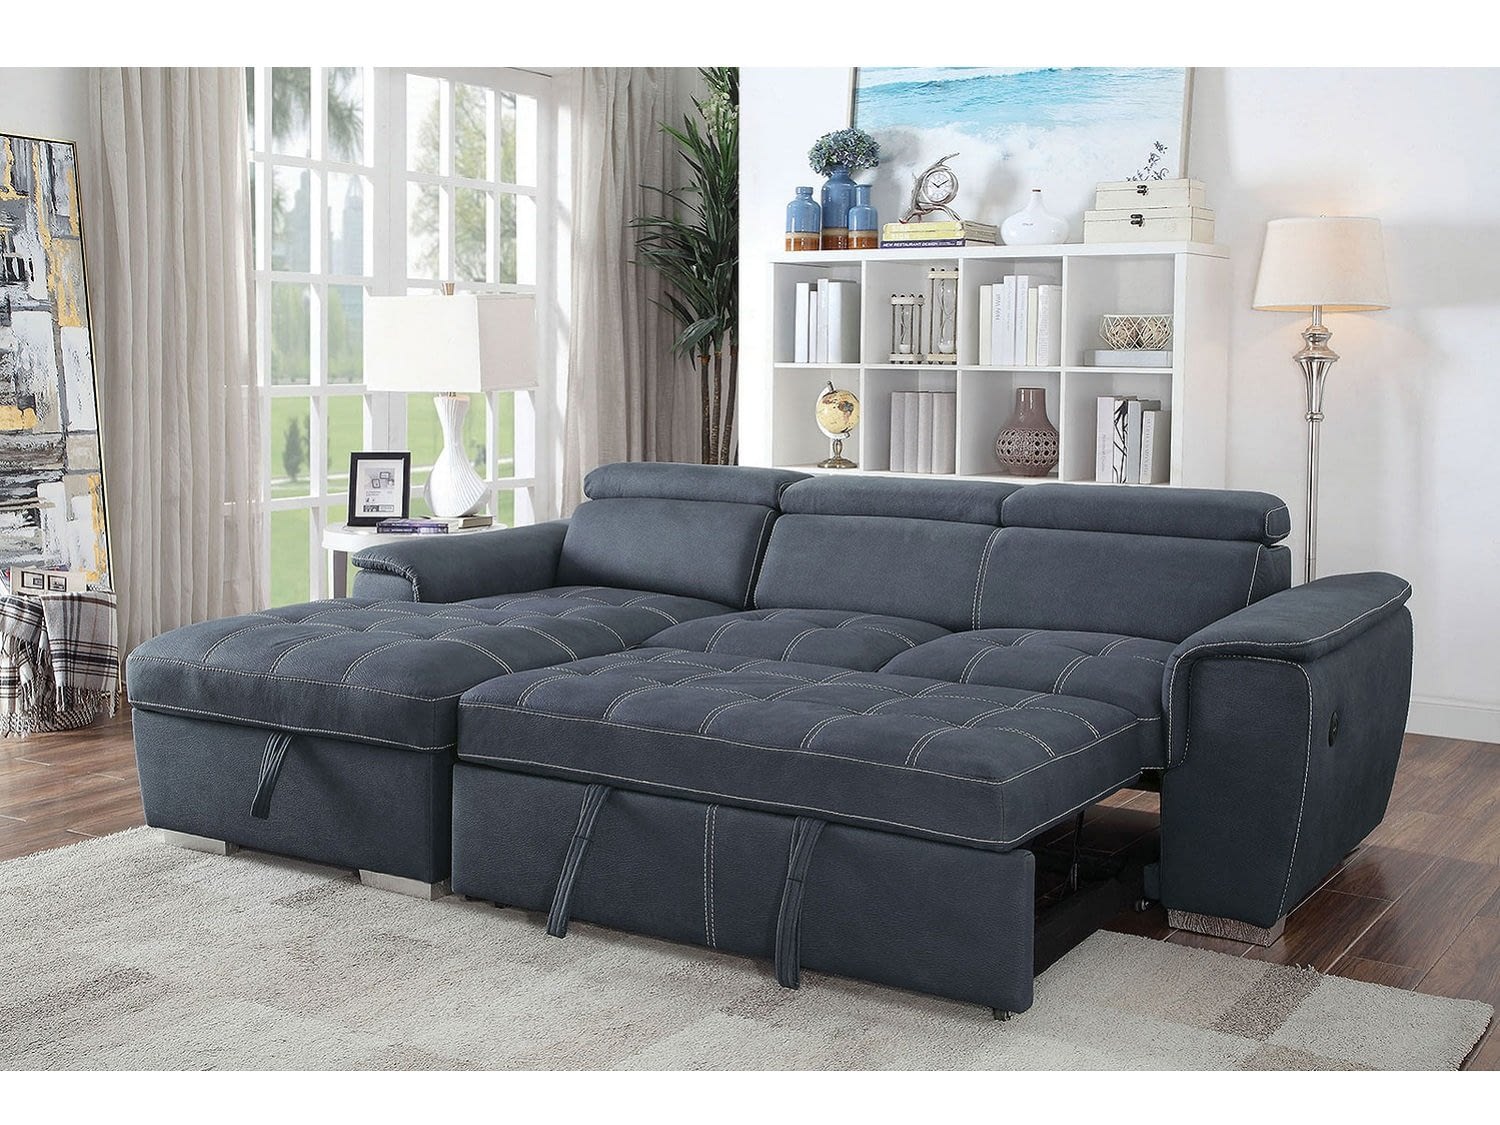 FERNCROFT Sleeper Sectional - Bed Pull Out